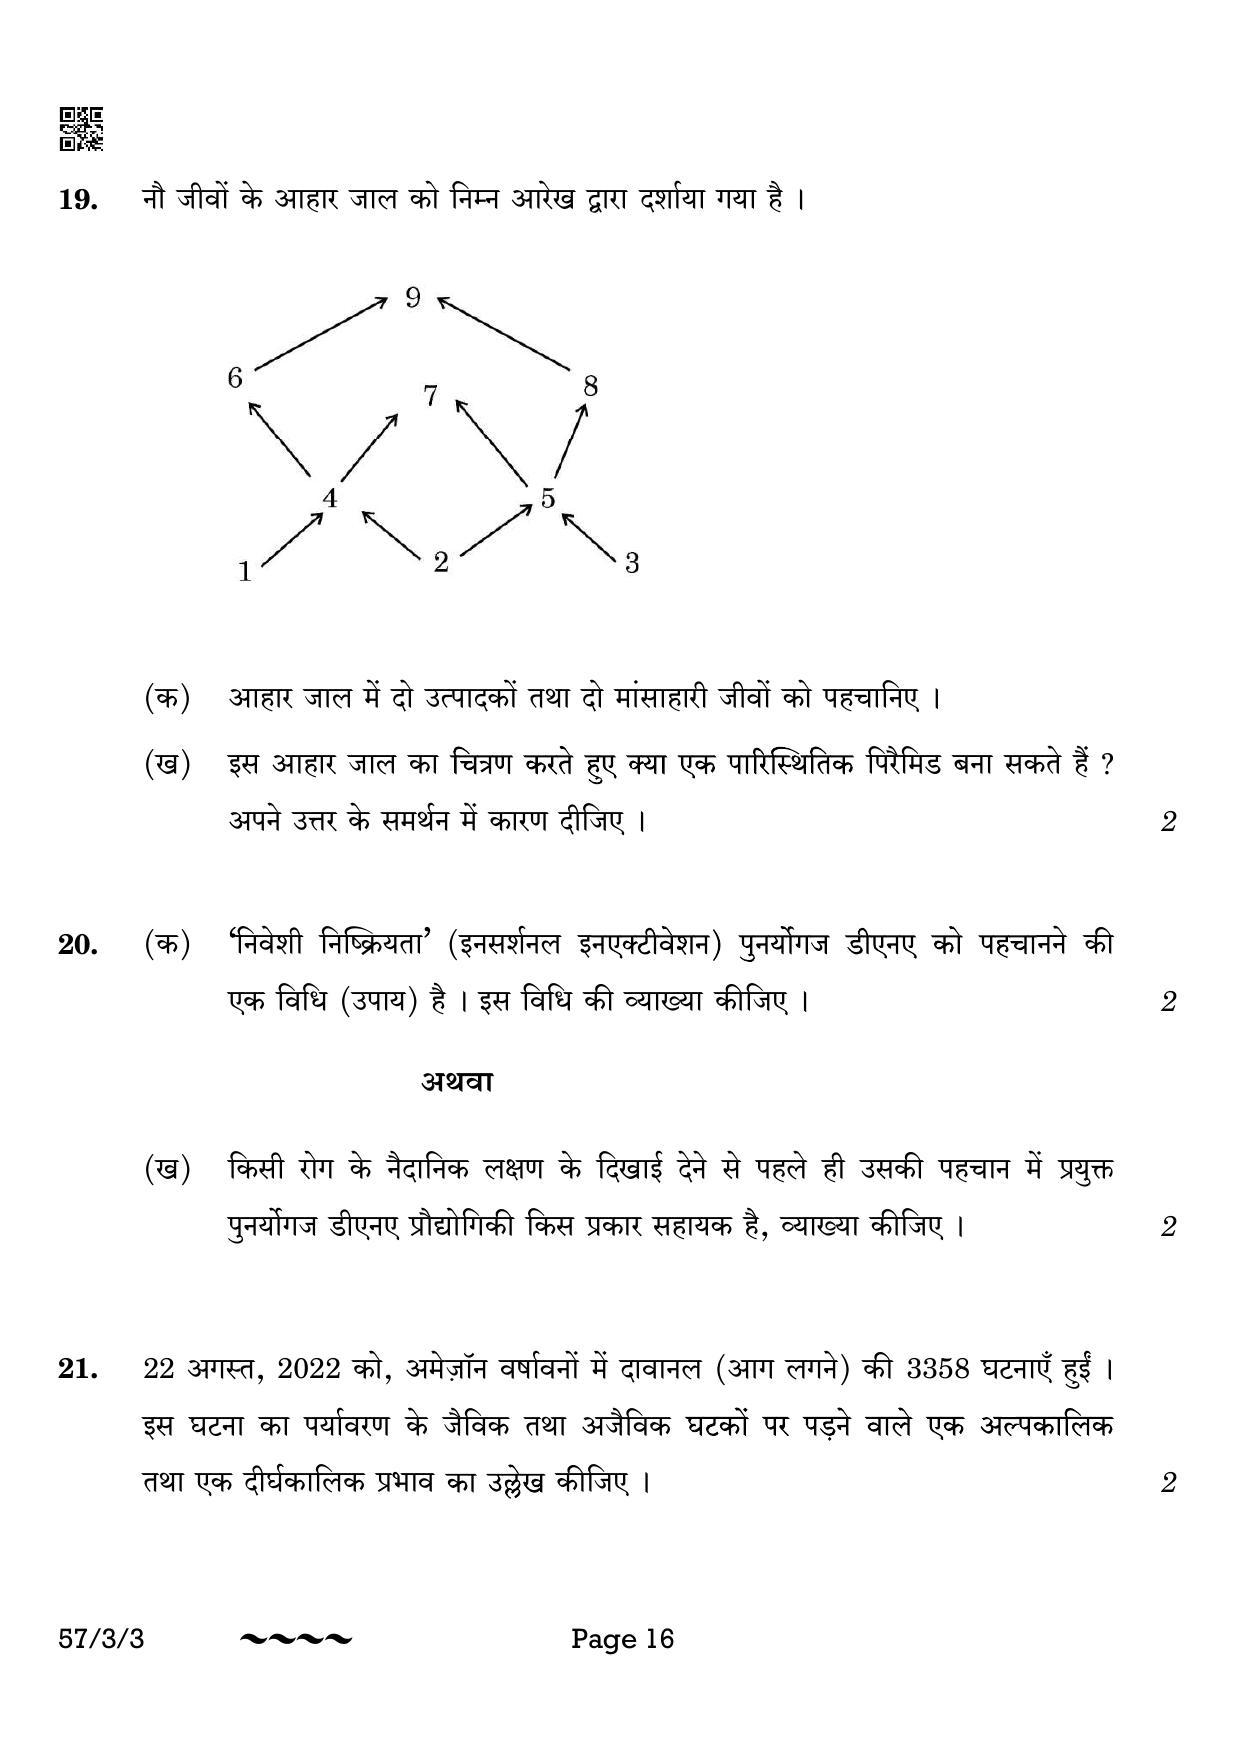 CBSE Class 12 57-3-3 Biology 2023 Question Paper - Page 16